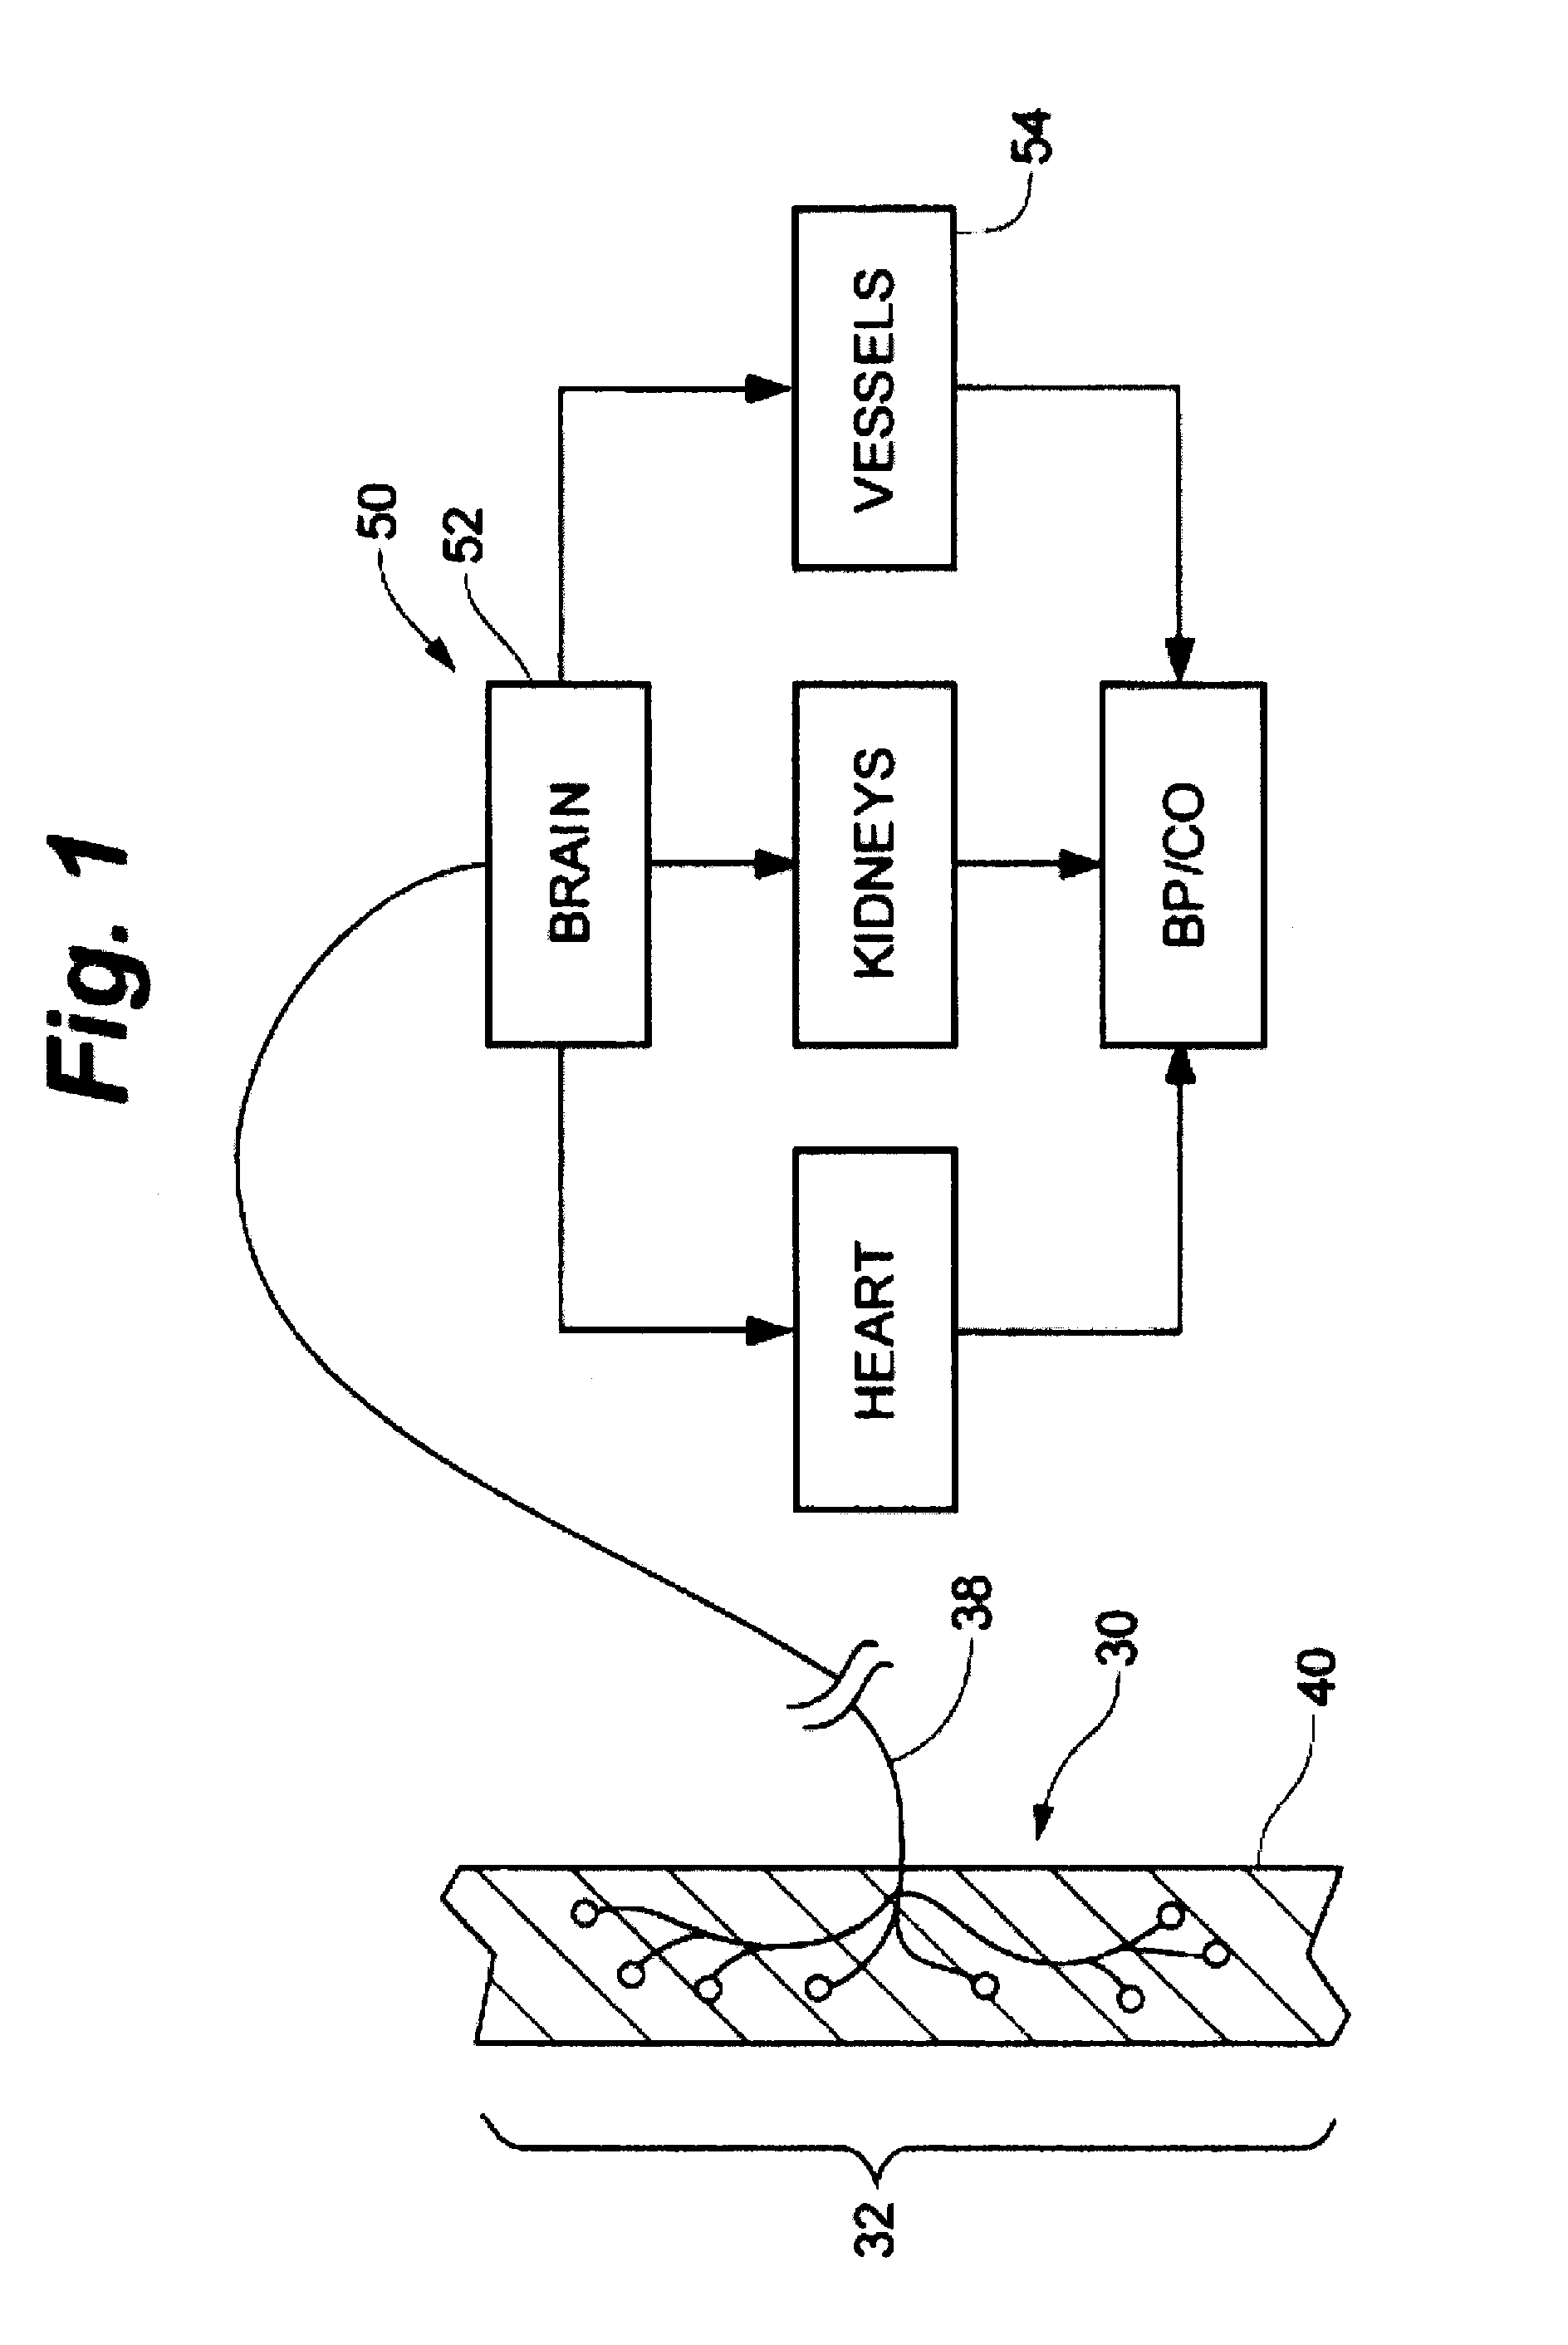 Adapter for connection to pulse generator